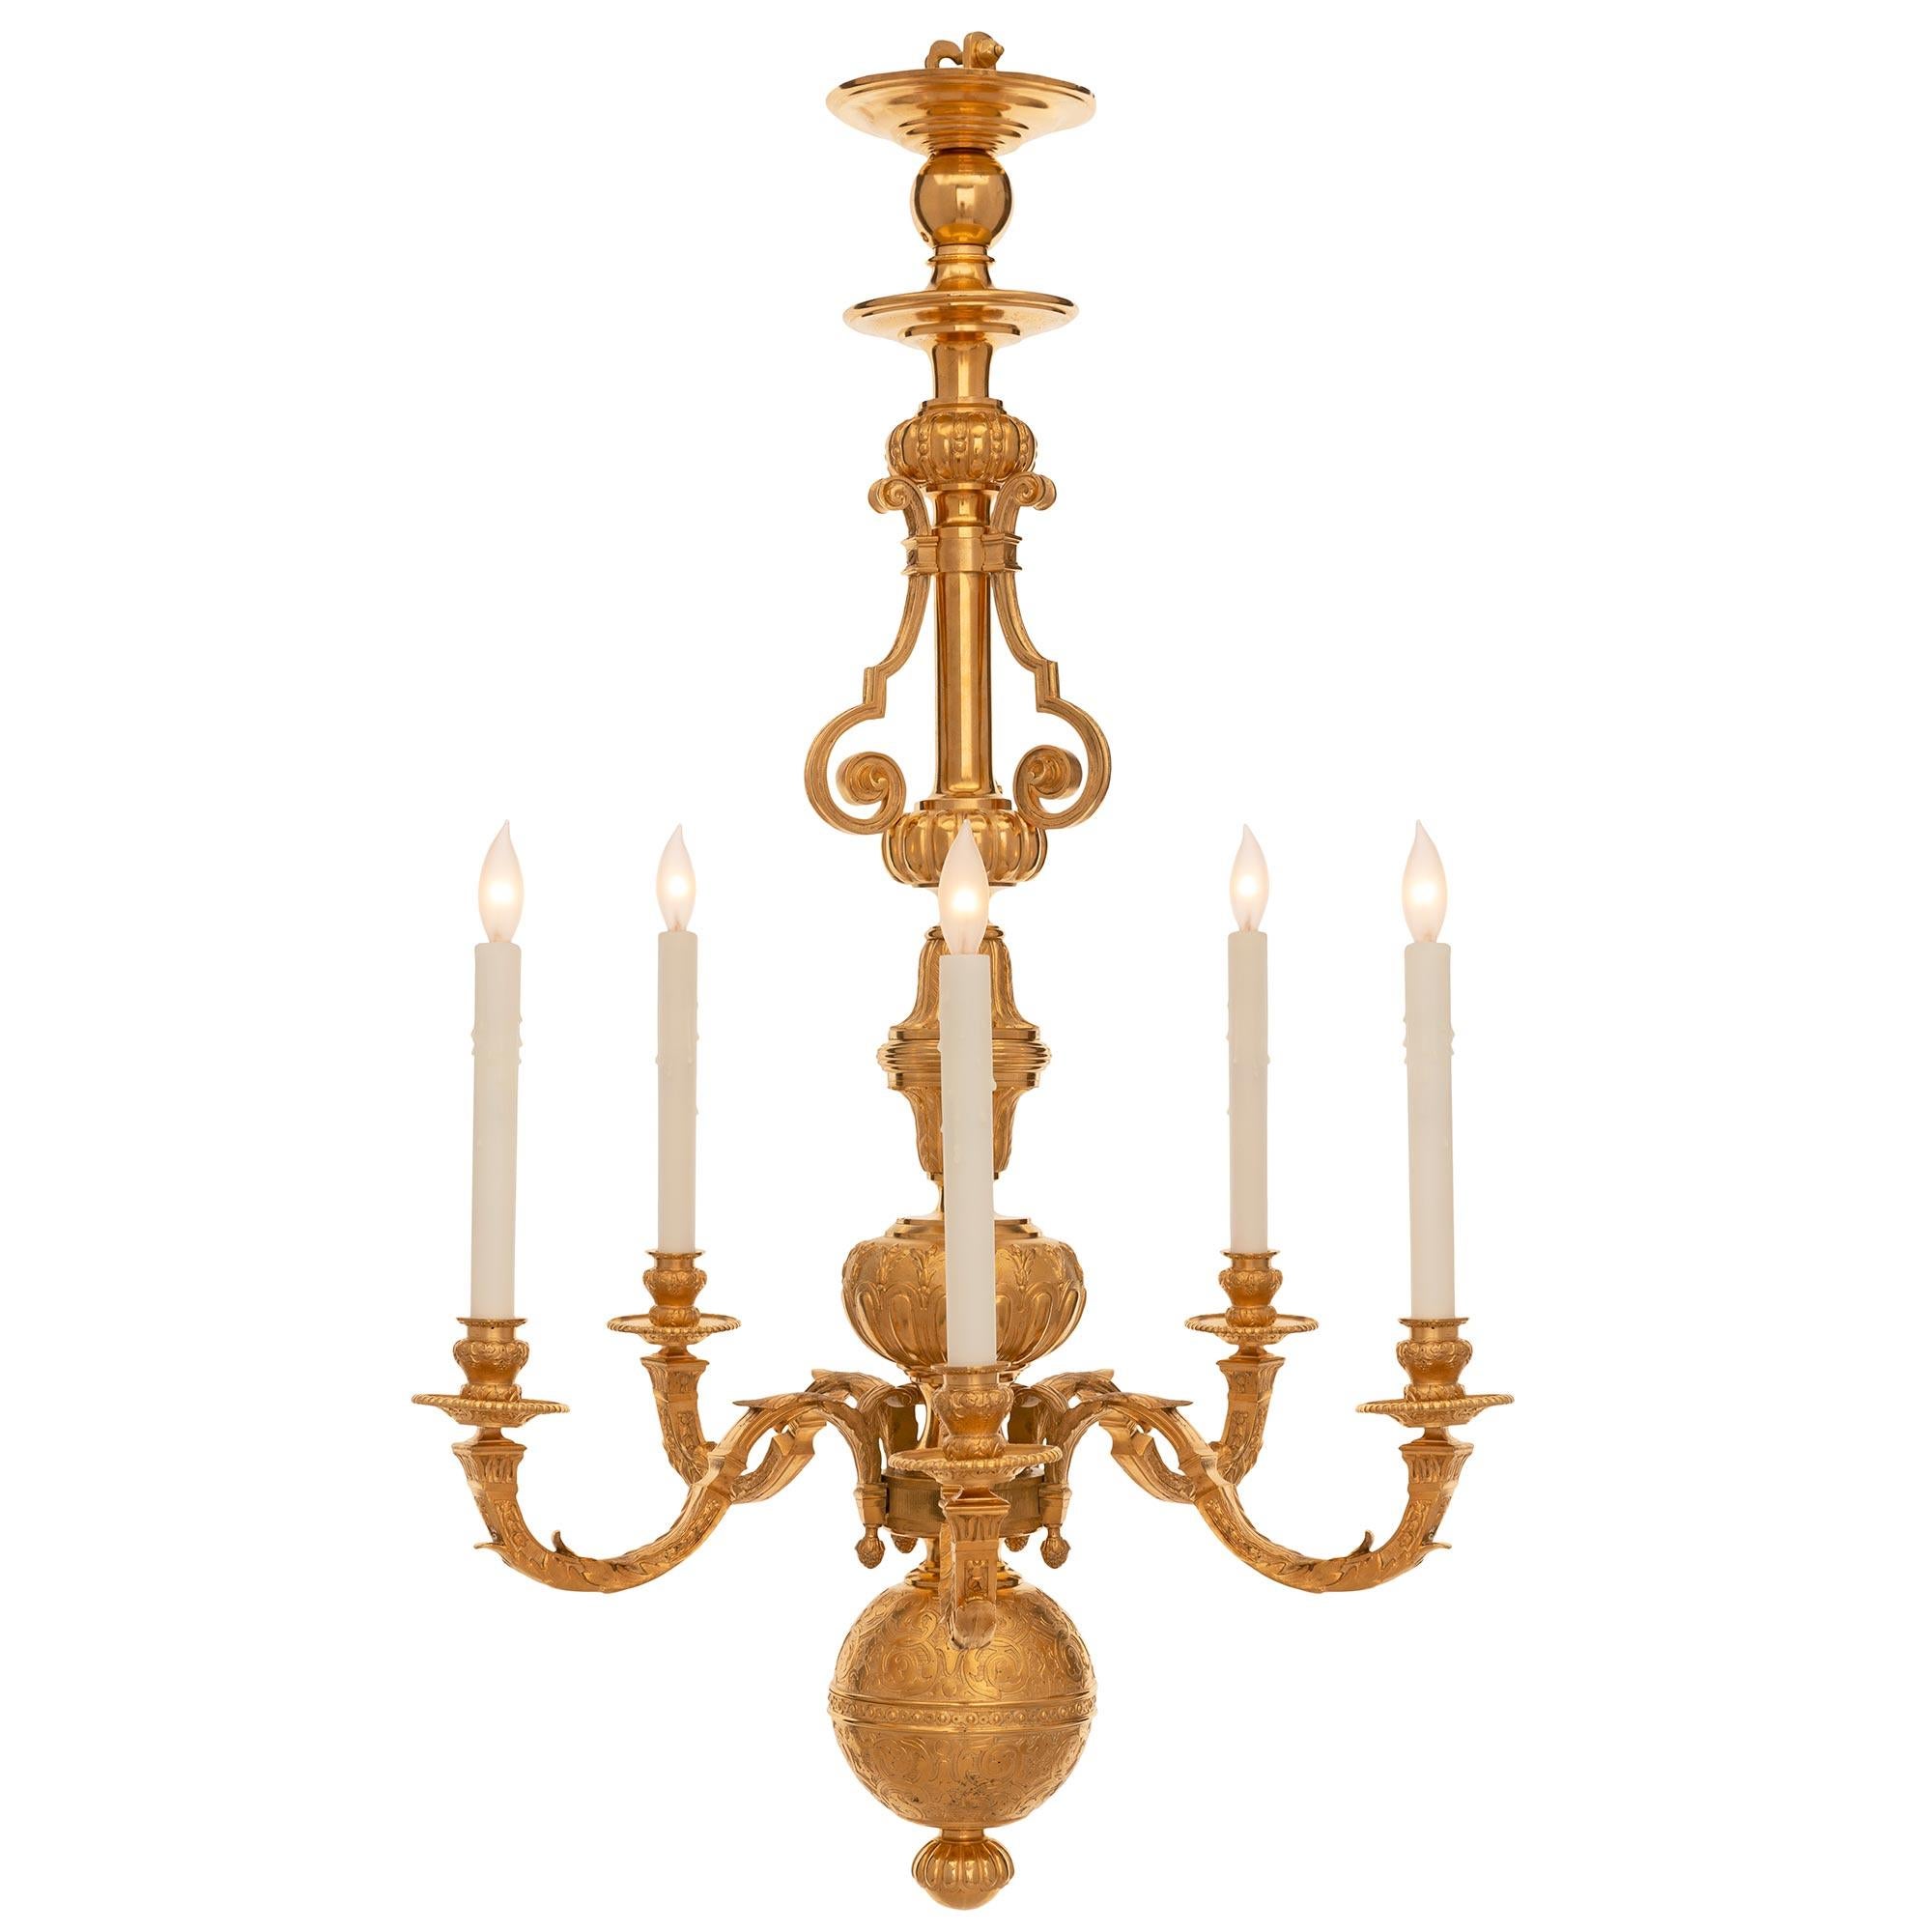 A wonderful and most decorative Dutch late 19th century Louis XVI st. ormolu chandelier. The five arm chandelier is centered by a fine bottom reeded finial and striking ball reserve with intricately detailed etched scrolled foliate designs with a